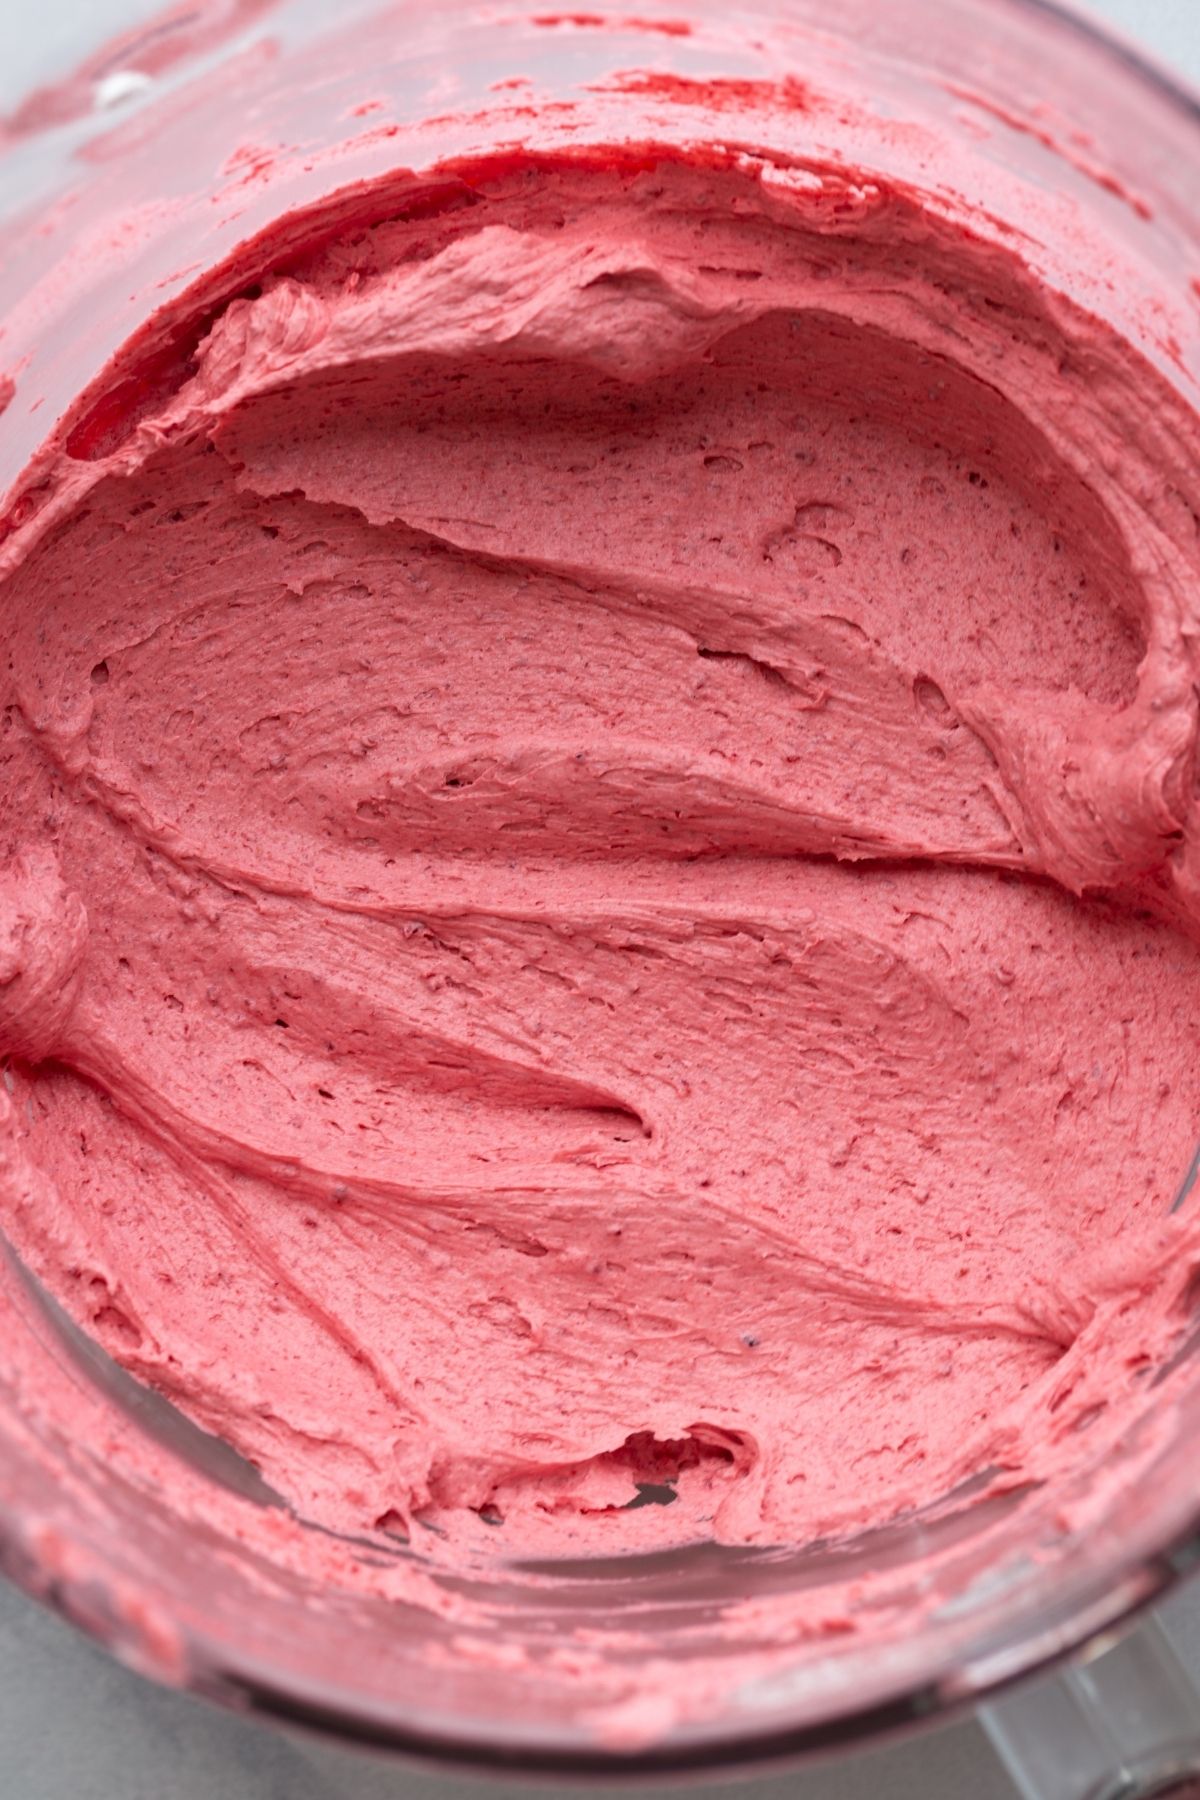 Raspberry frosting in a glass mixing bowl.